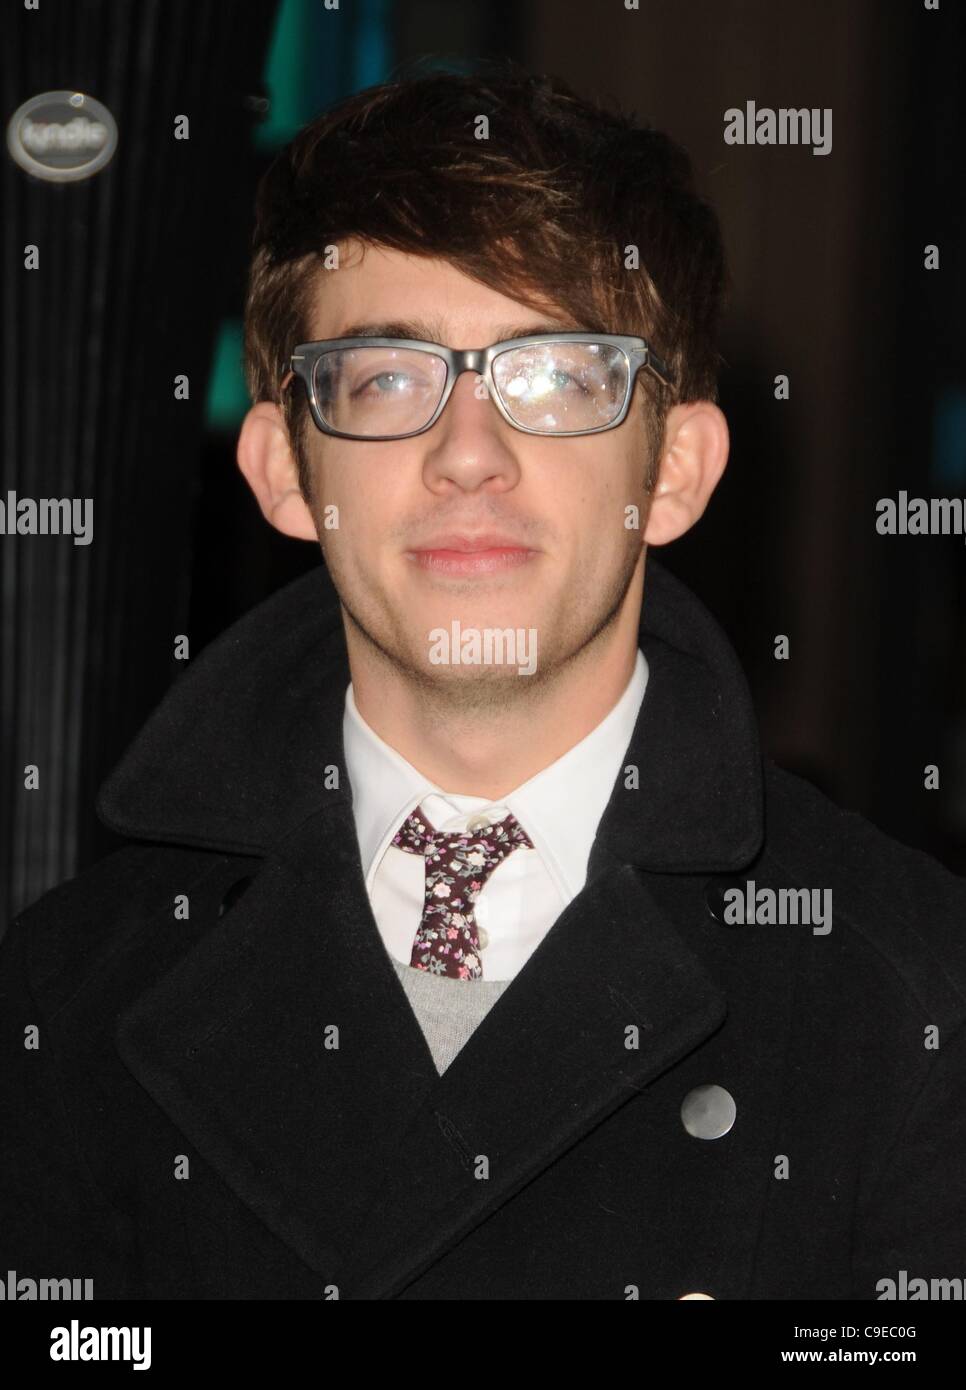 Kevin McHale at arrivals for NEW YEAR'S EVE Premiere, Grauman's Chinese Theatre, Los Angeles, CA December 5, 2011. Photo By: Dee Cercone/Everett Collection Stock Photo